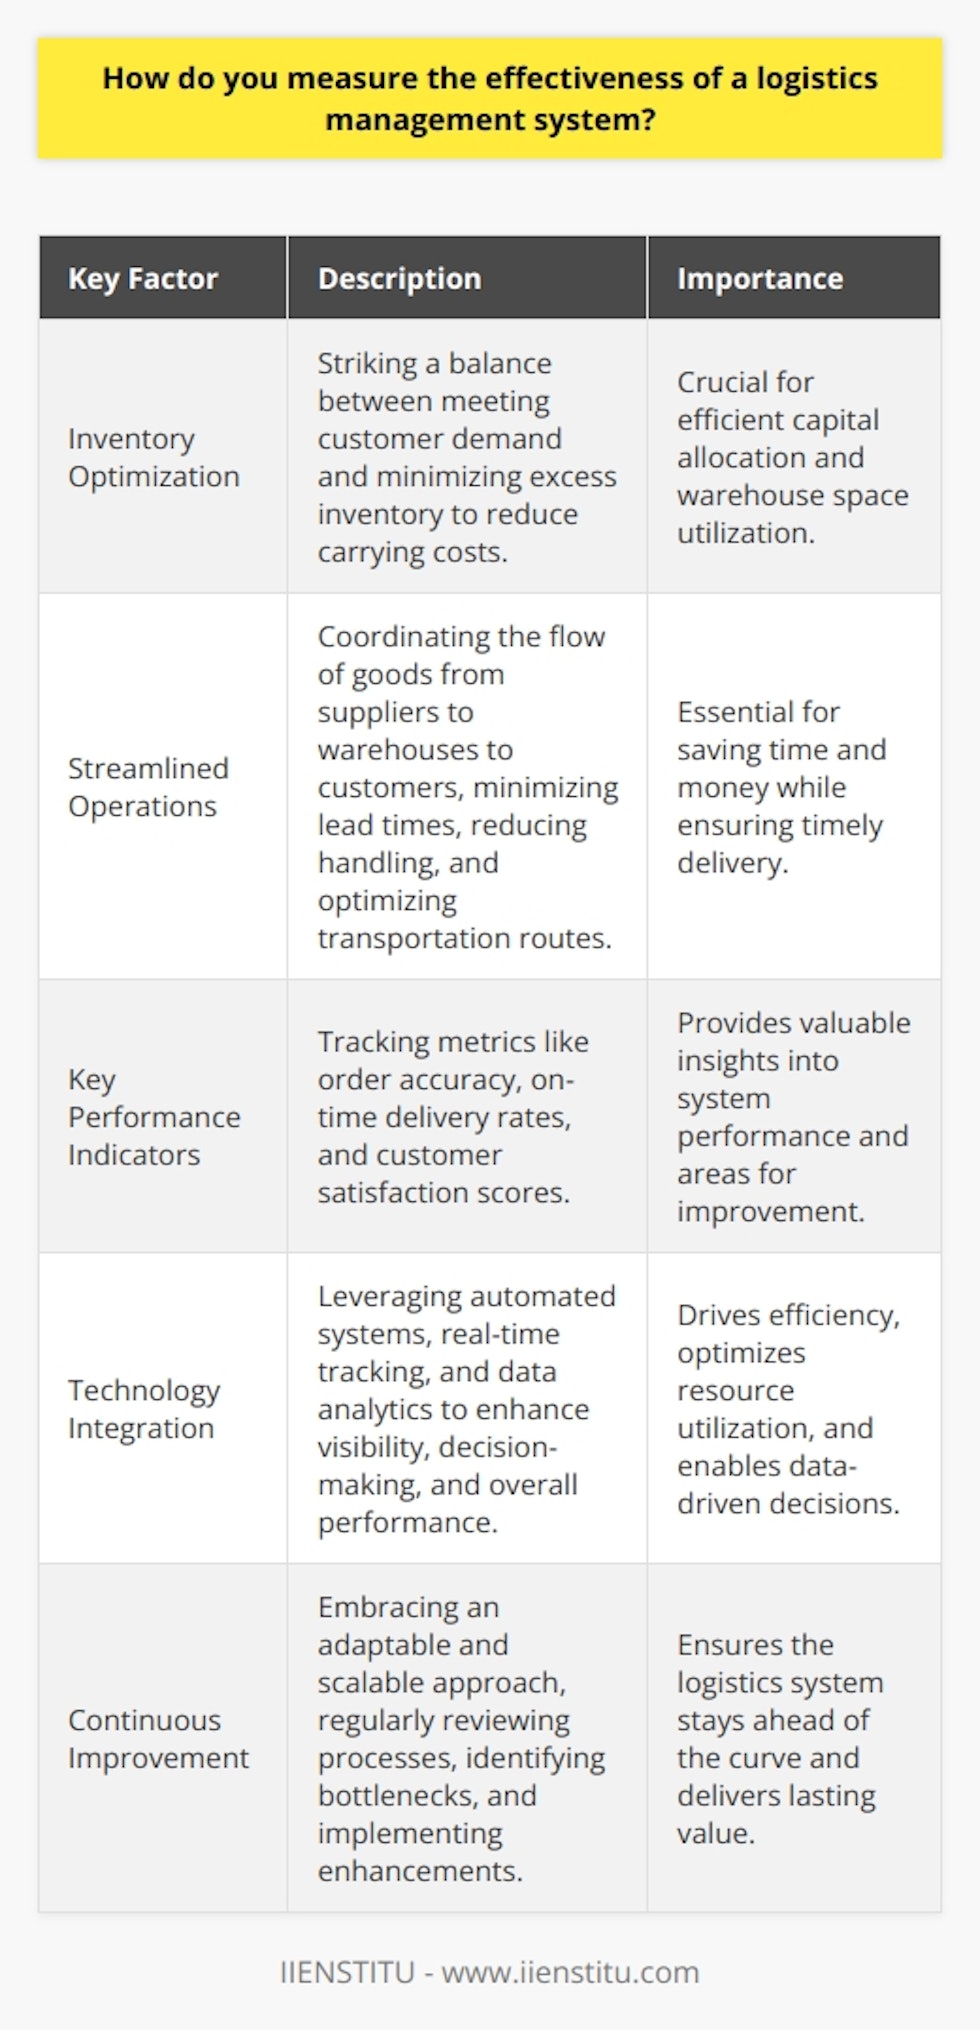 When measuring the effectiveness of a logistics management system, I consider several key factors. First and foremost, I look at how well the system optimizes inventory levels and reduces carrying costs. This involves striking a delicate balance between having enough stock to meet customer demand while minimizing excess inventory that ties up capital and warehouse space. Streamlining Operations Another critical aspect is how efficiently the logistics system streamlines operations. I assess how well it coordinates the flow of goods from suppliers to warehouses to customers. The goal is to minimize lead times, reduce handling, and optimize transportation routes to save time and money. Tracking Key Metrics To gauge effectiveness, I track key performance indicators like order accuracy, on-time delivery rates, and customer satisfaction scores. These metrics provide valuable insights into how well the logistics system is functioning and where improvements can be made. Leveraging Technology I also evaluate how effectively the logistics management system leverages technology. Automated systems, real-time tracking, and data analytics can significantly enhance visibility, decision-making, and overall performance. The best logistics solutions seamlessly integrate these technologies to drive efficiency and optimize resources. Continuous Improvement Finally, I believe that a truly effective logistics management system is one that embraces continuous improvement. It should be adaptable, scalable, and constantly evolving to meet changing business needs and market conditions. By regularly reviewing processes, identifying bottlenecks, and implementing enhancements, a logistics system can stay ahead of the curve and deliver lasting value.